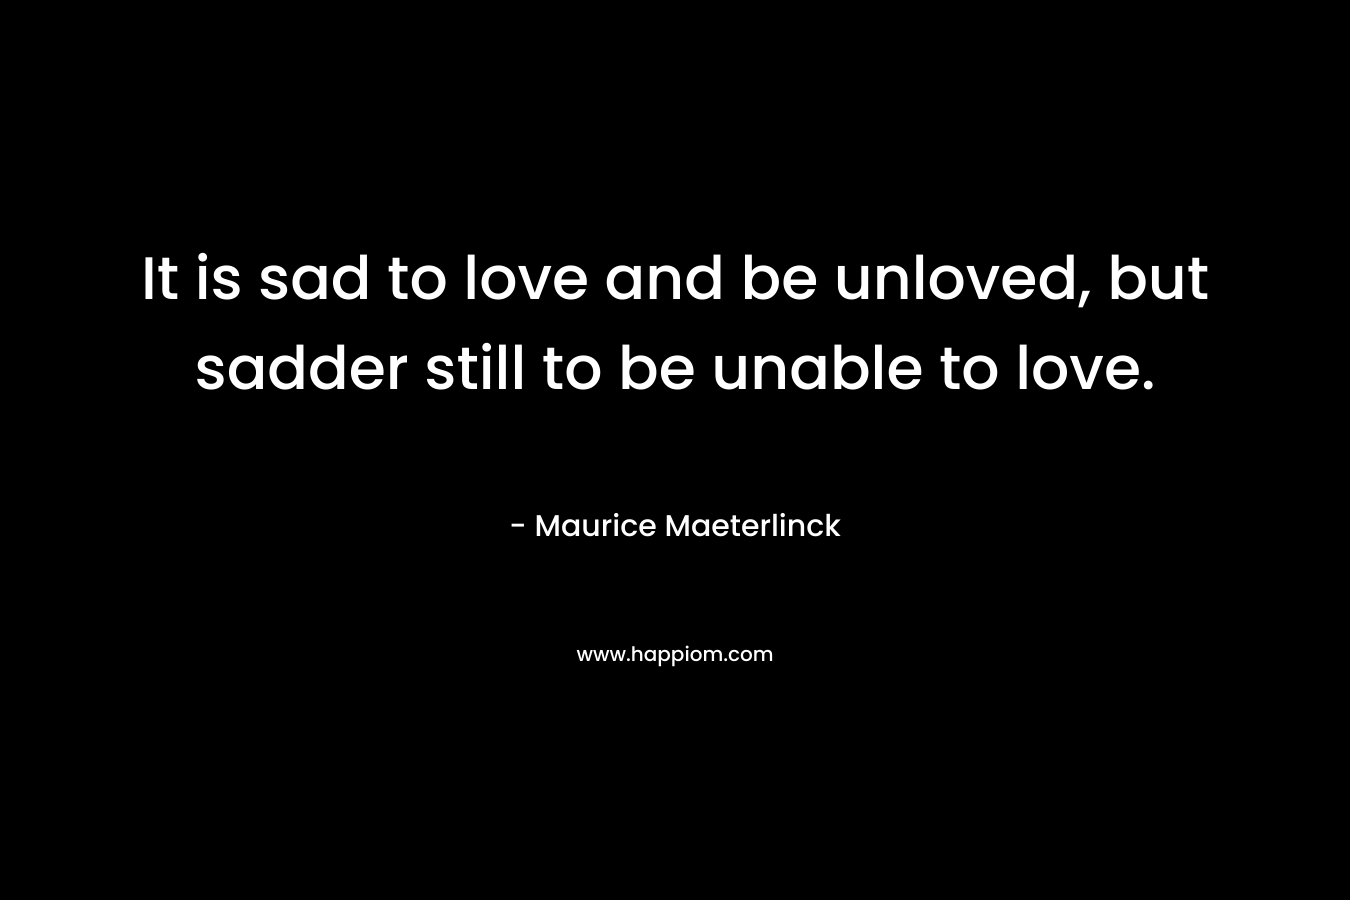 It is sad to love and be unloved, but sadder still to be unable to love. – Maurice Maeterlinck